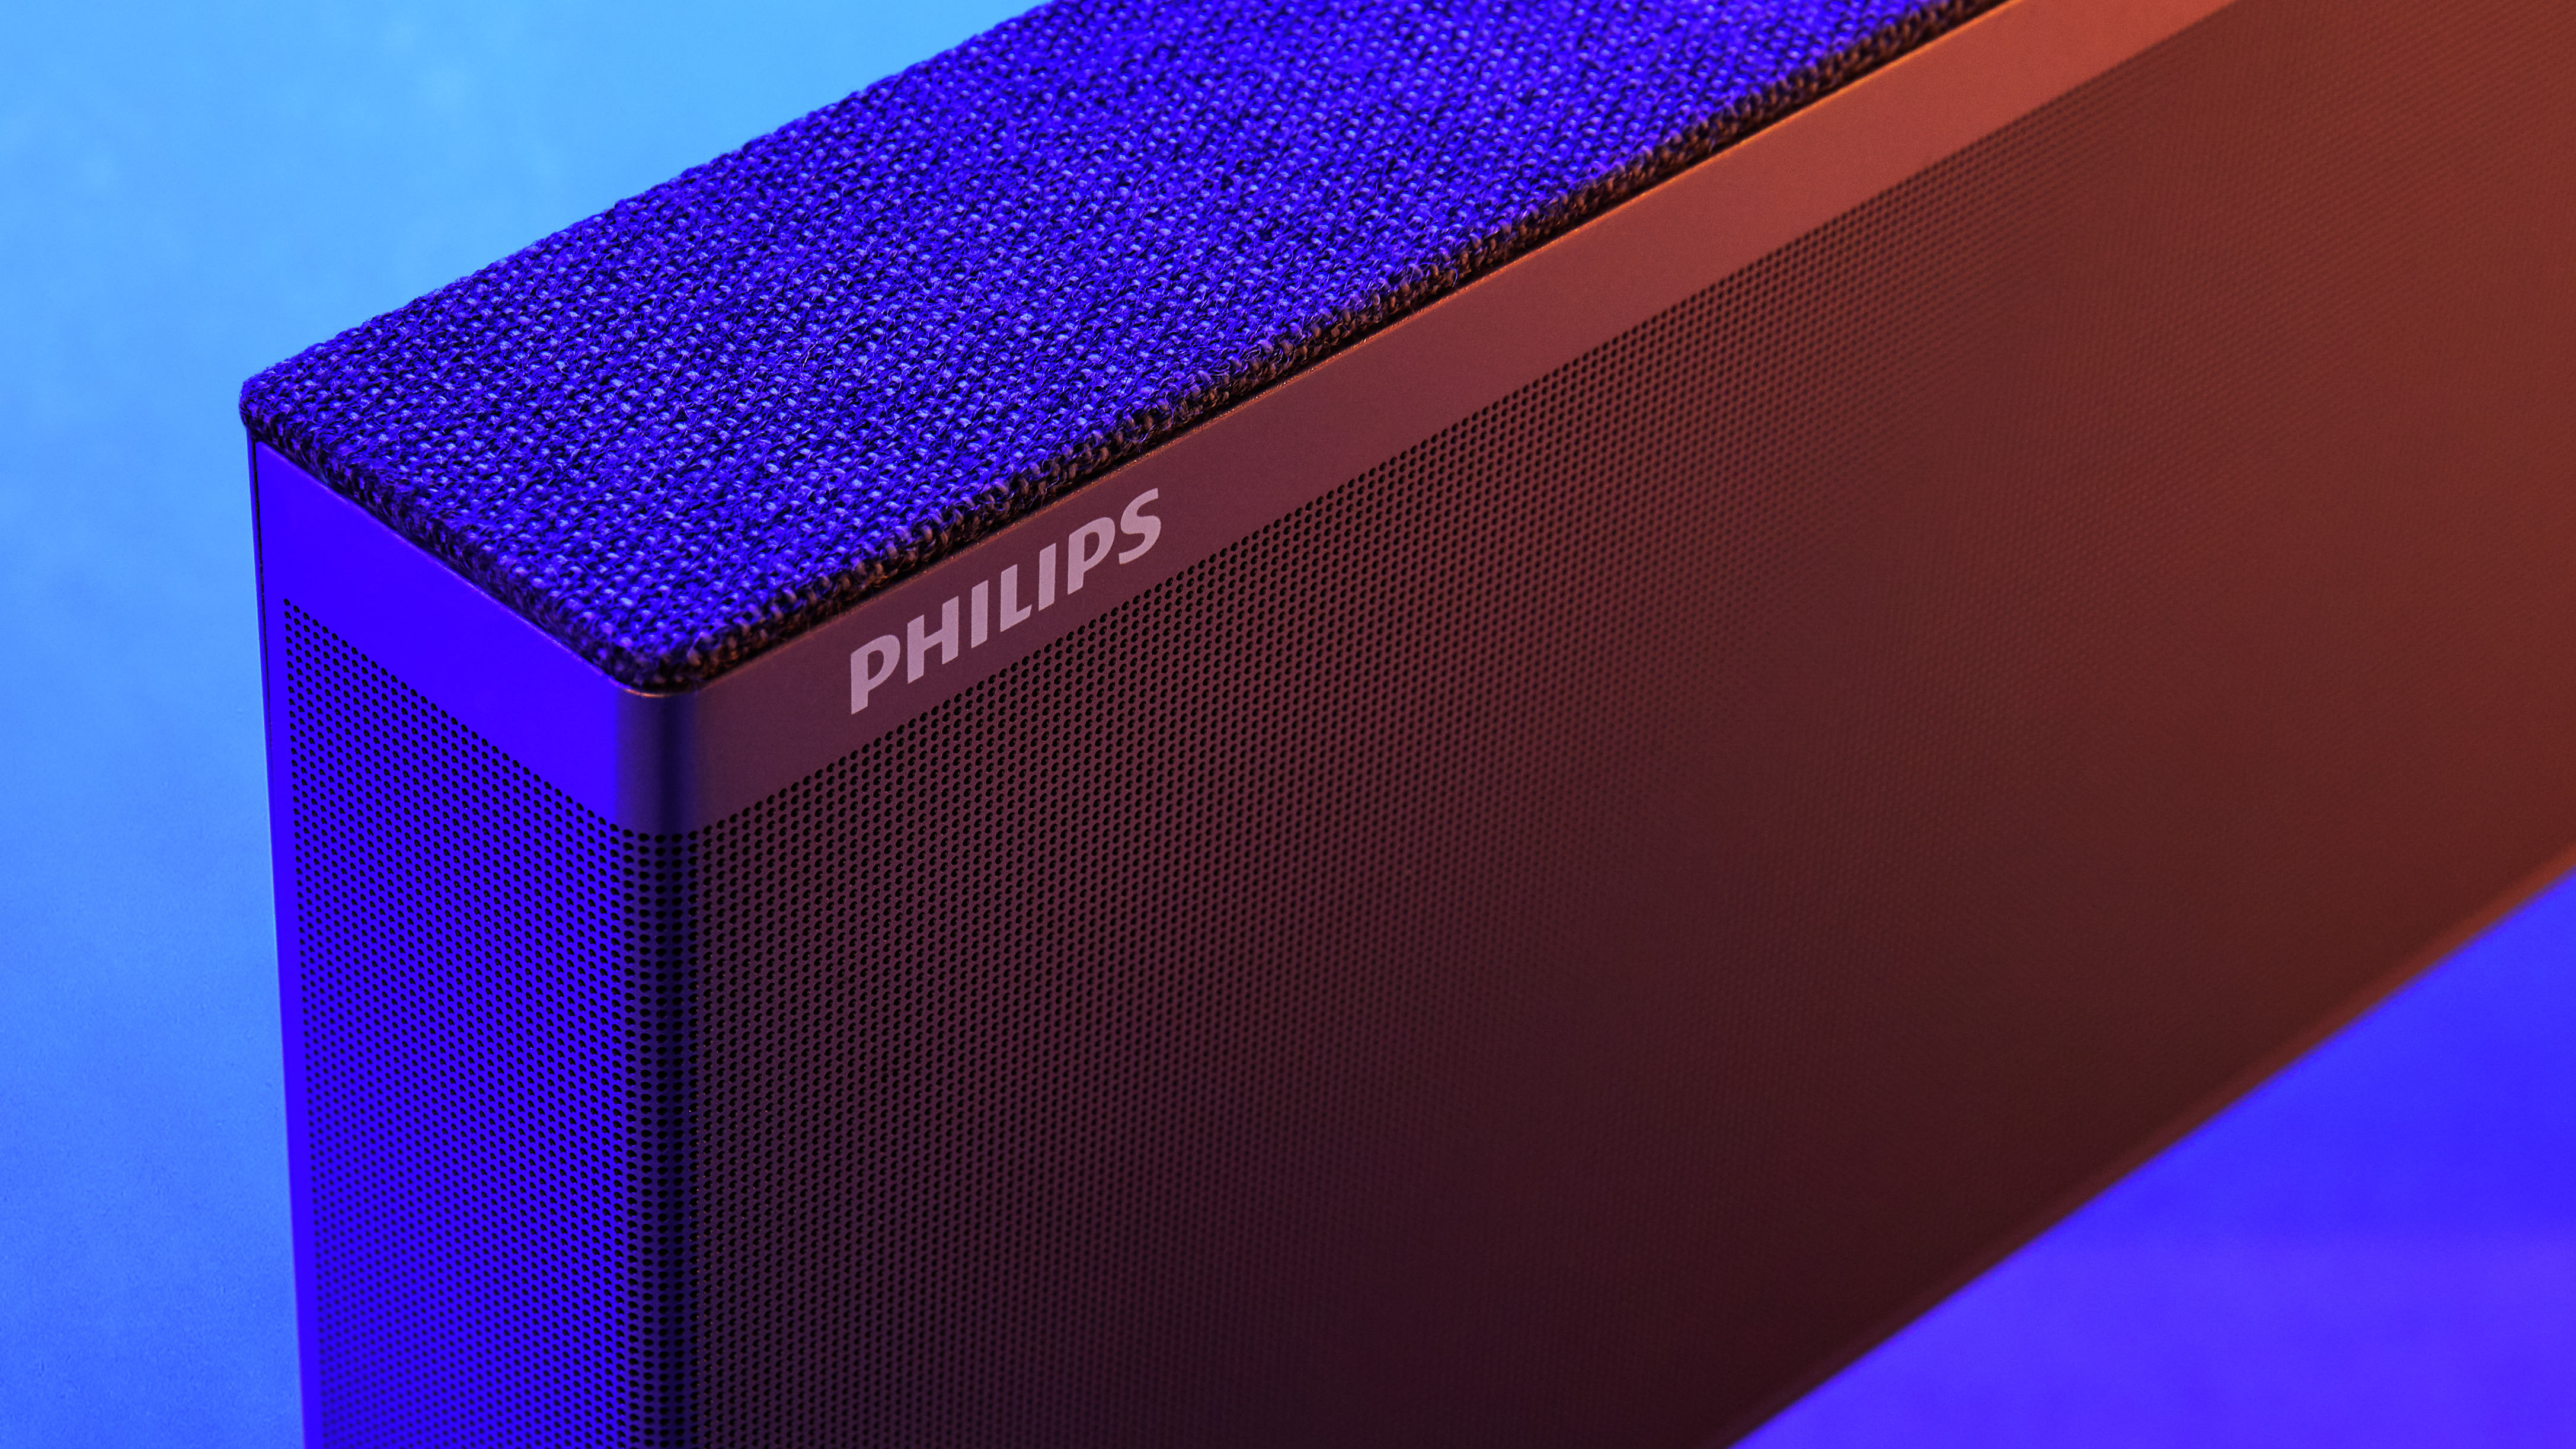 close-up on speaker enclosure for Philips TV